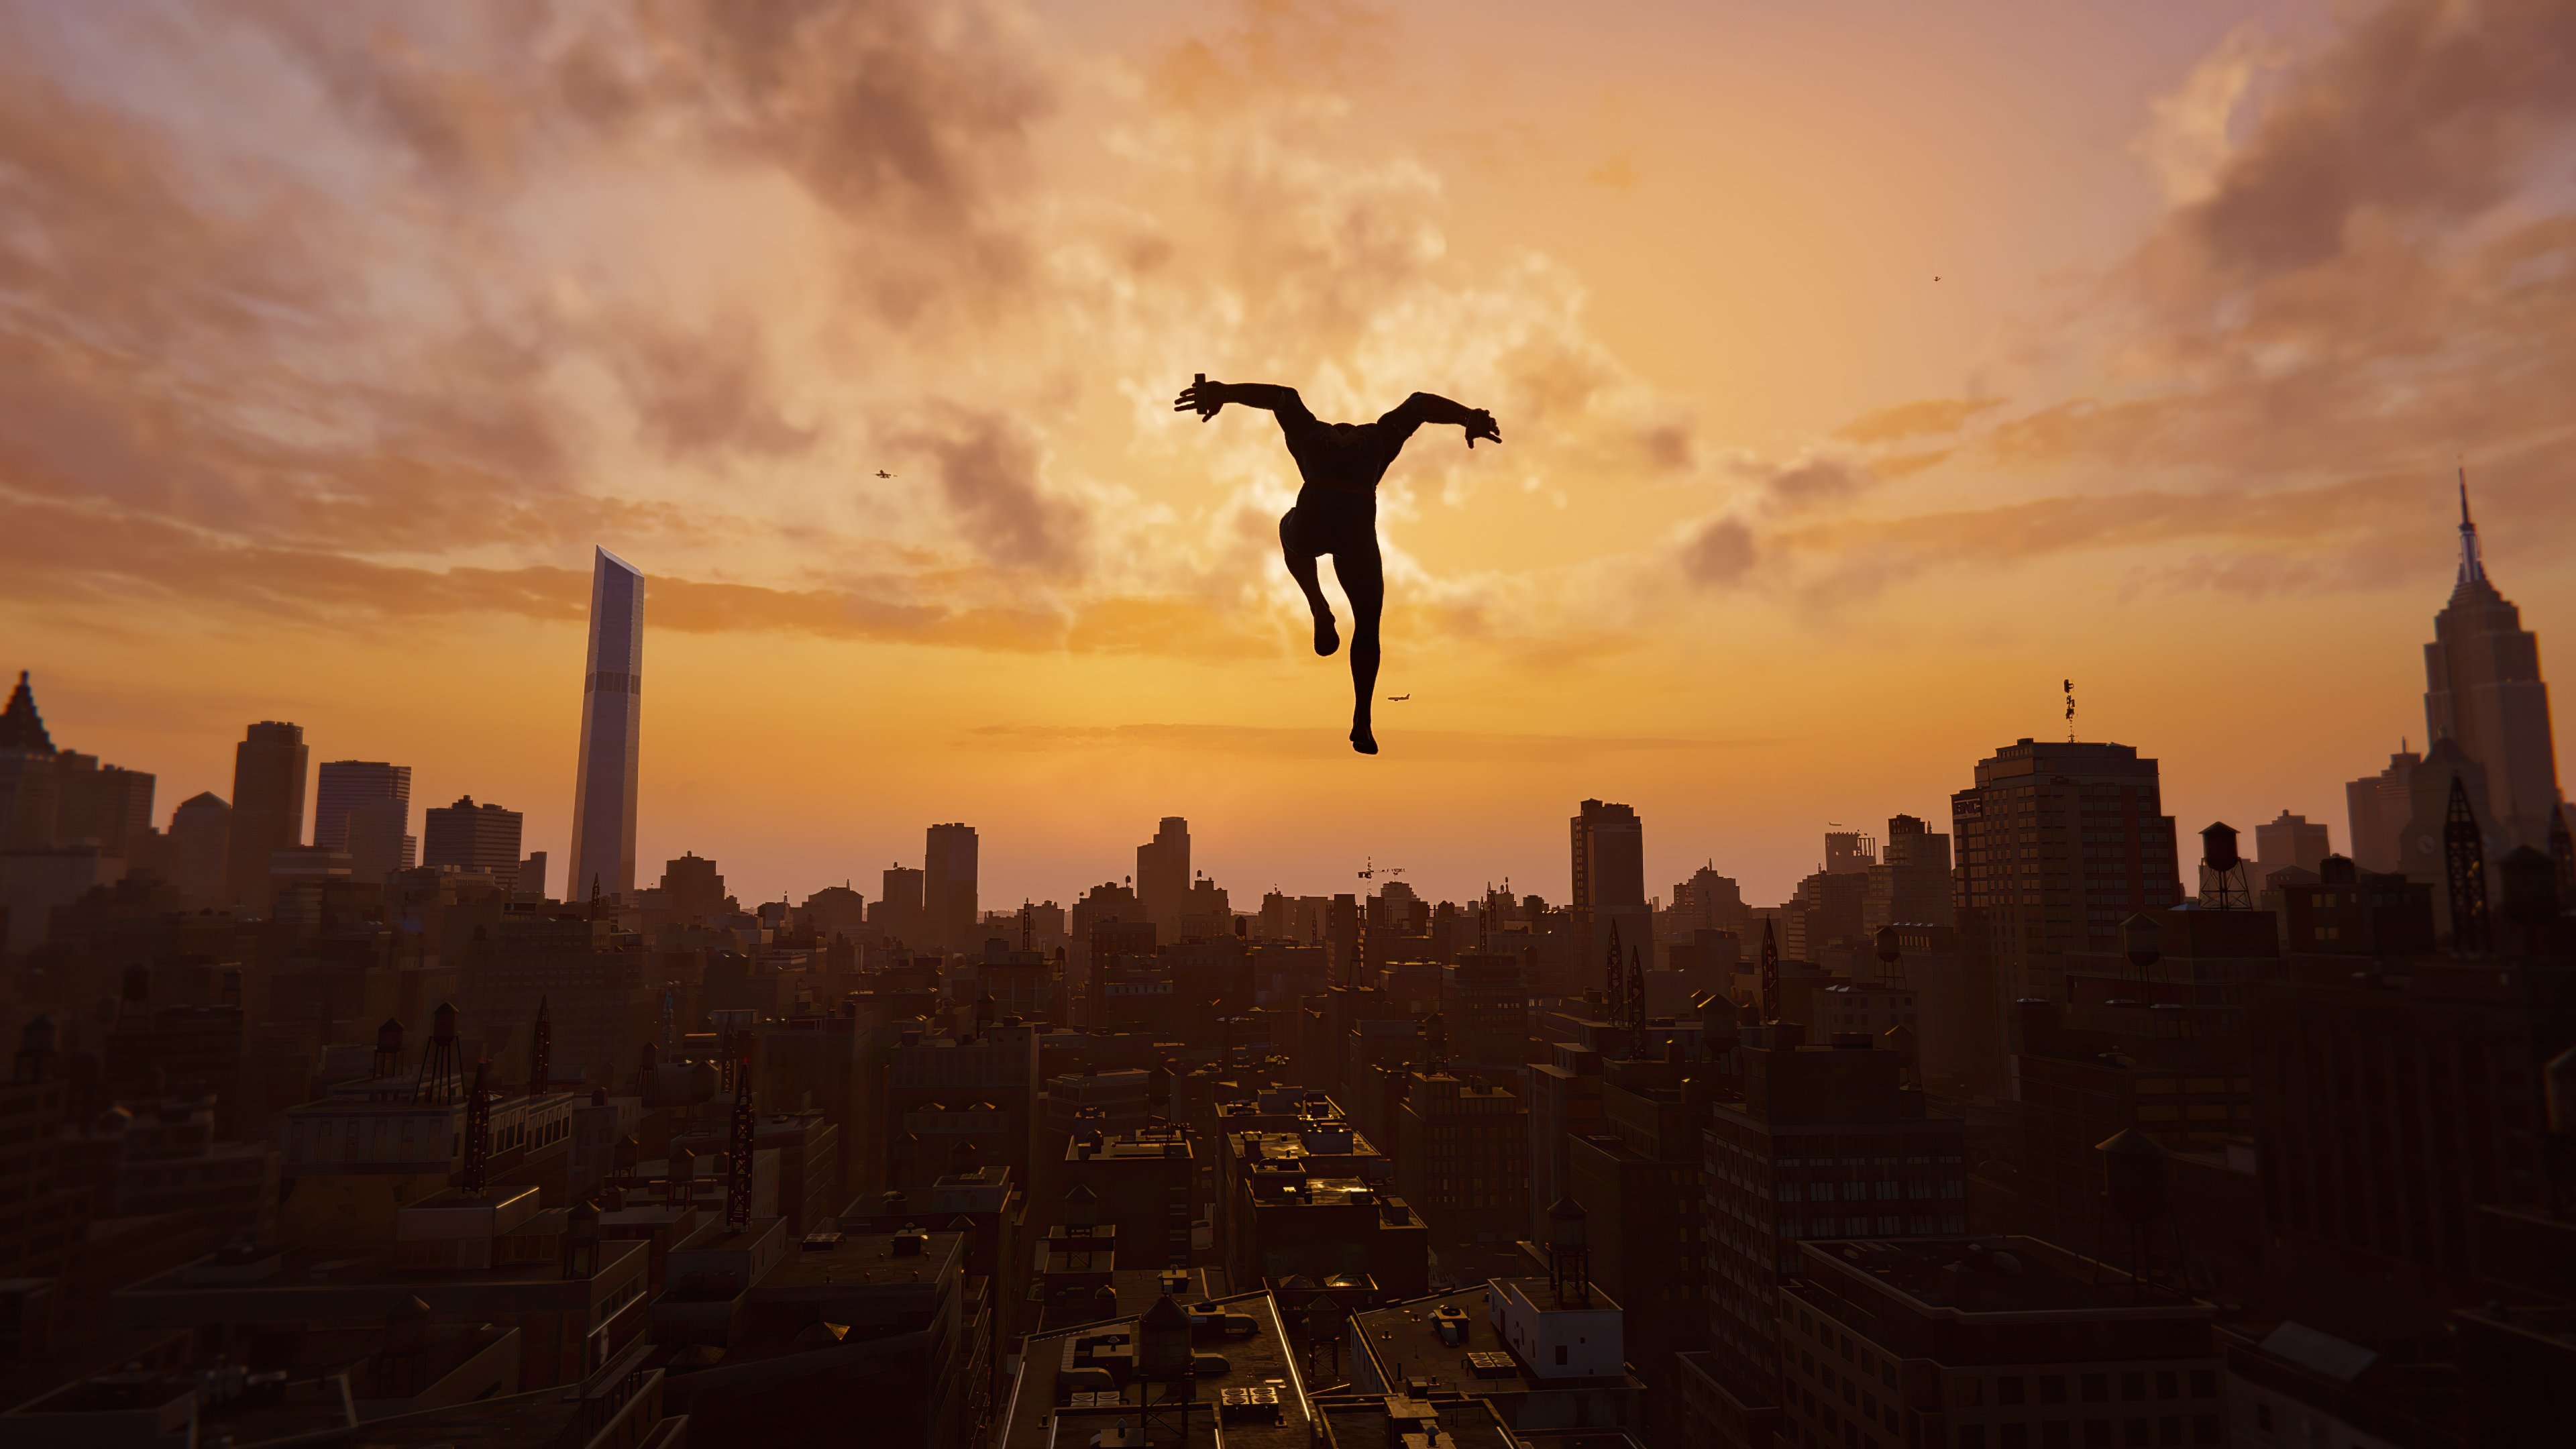 Spider Man over the city Wallpaper 4k Ultra HD ID:11210